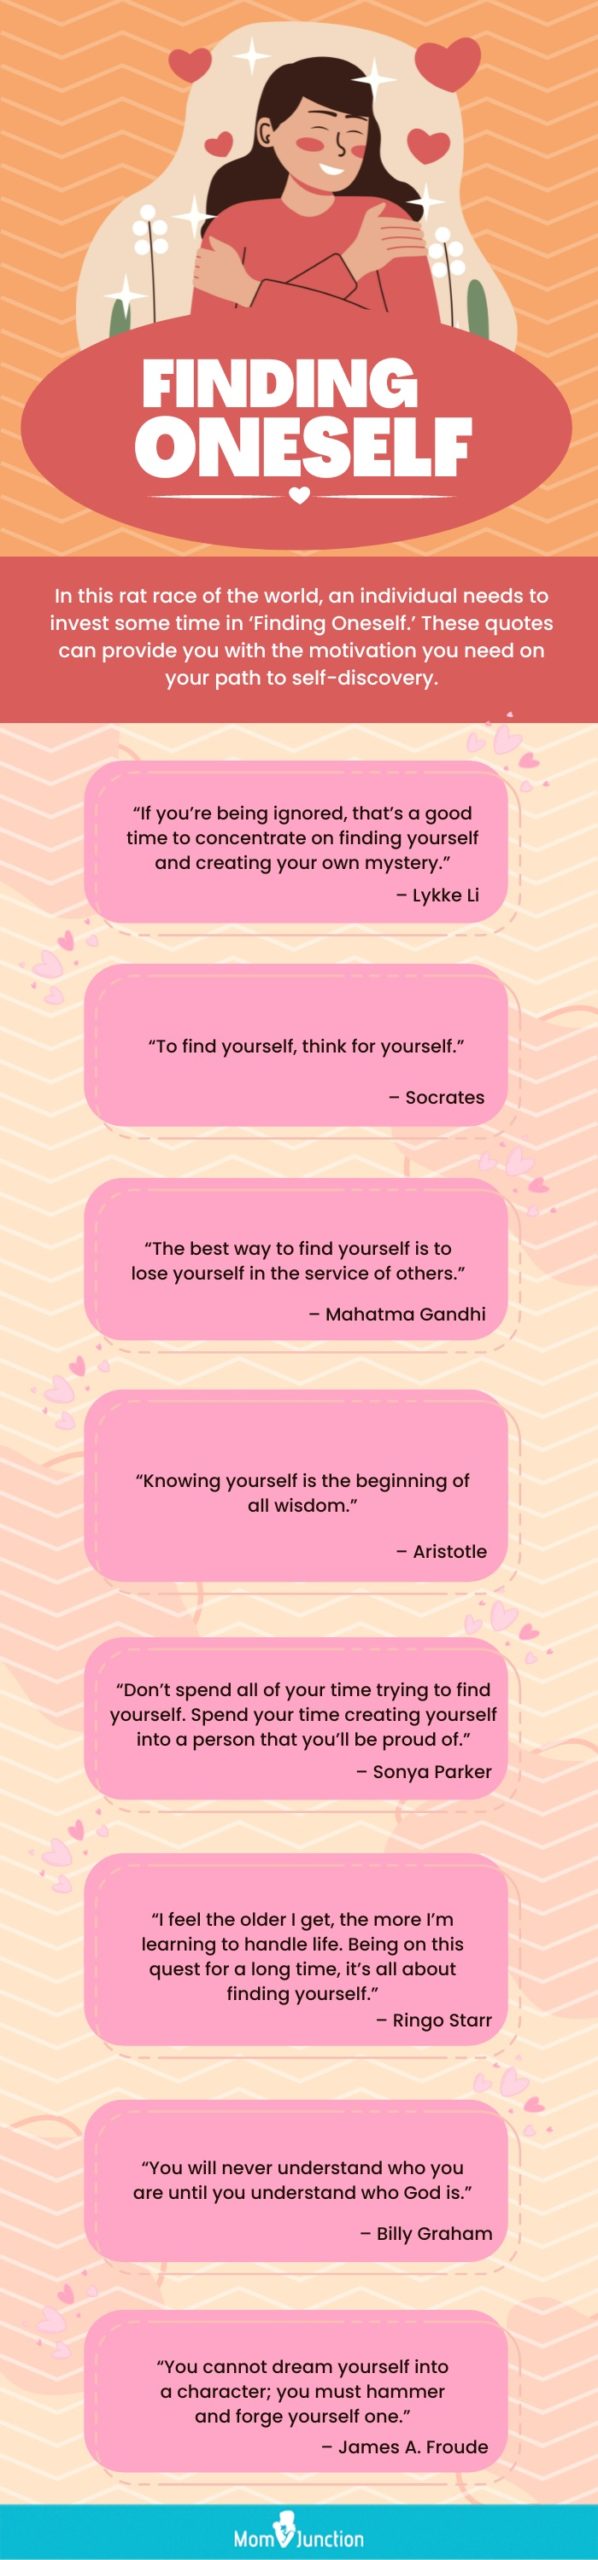 quotes on self-discovery (infographic)